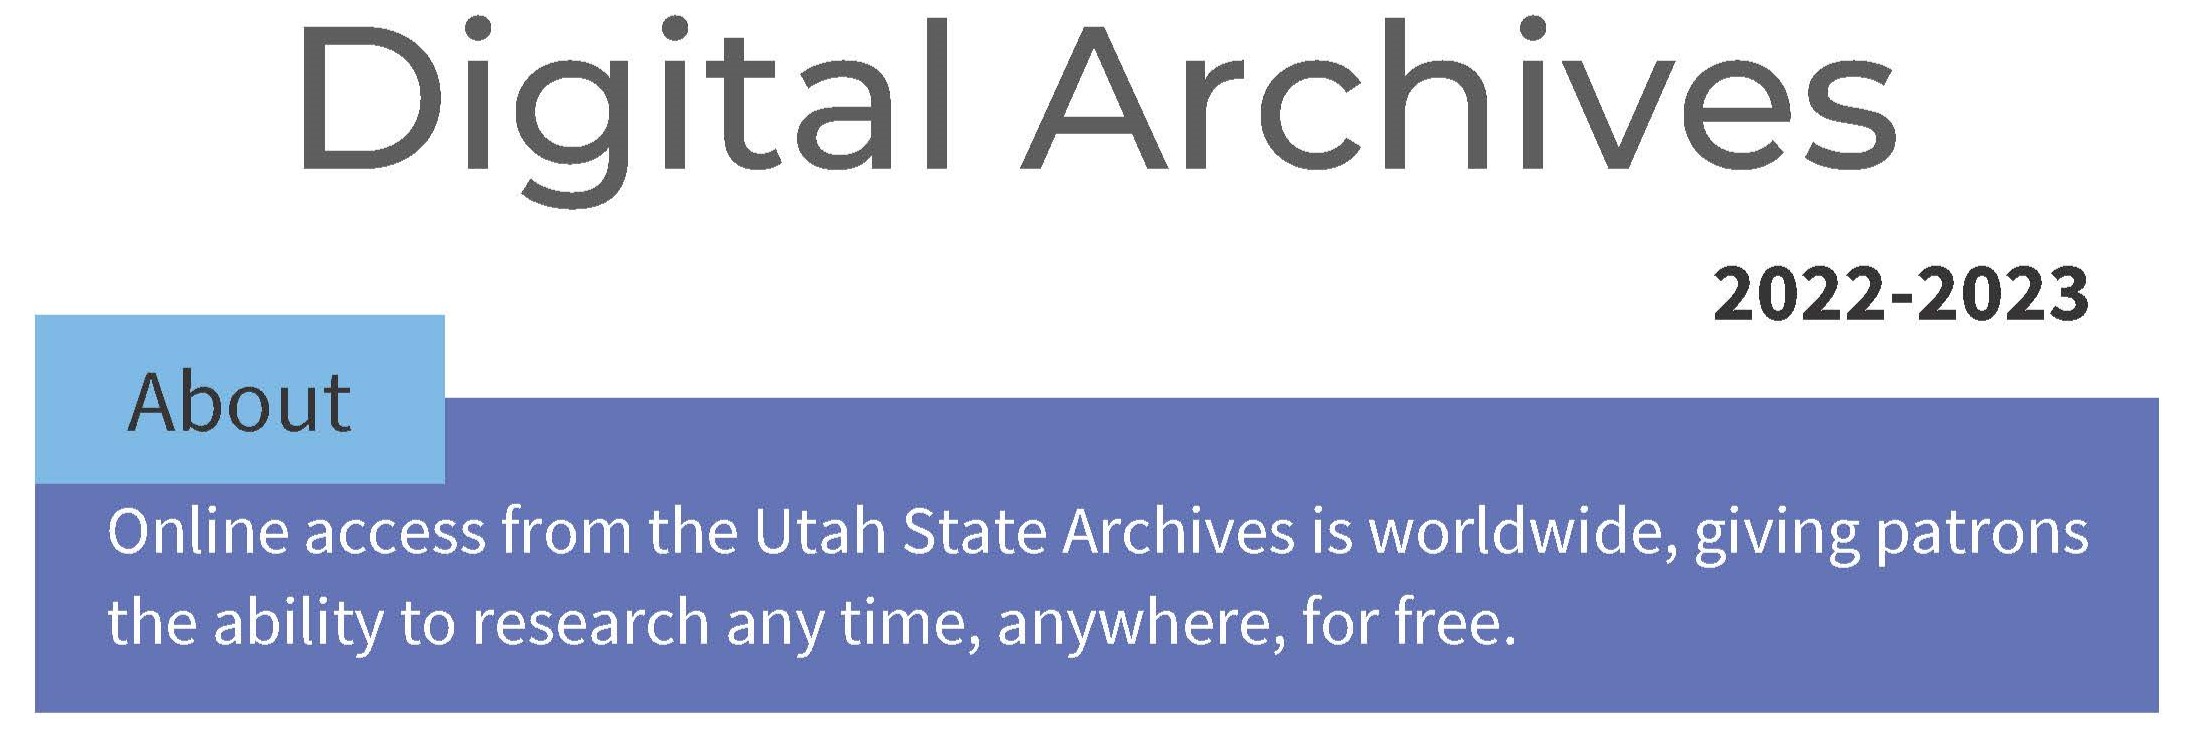 Featured image for “2022-2023 in the Utah State Digital Archives”